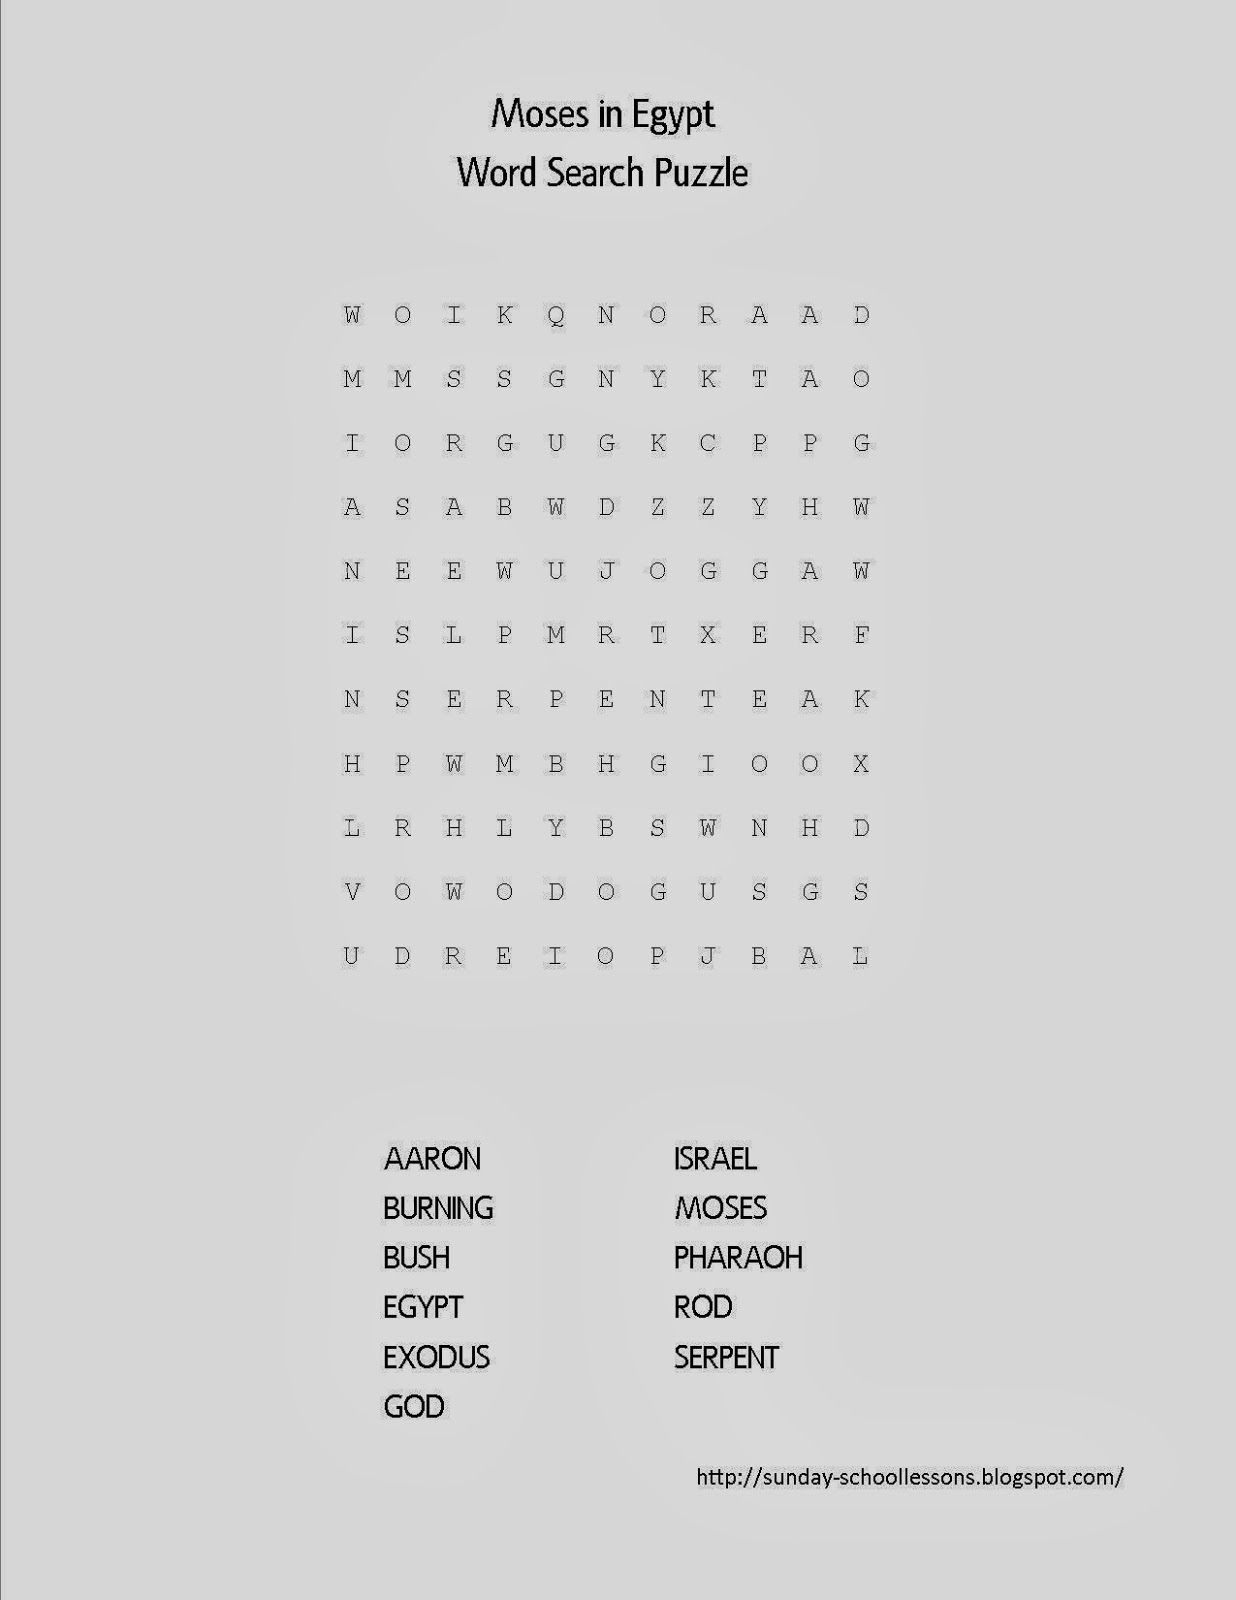 Moses In Egypt Word Search Puzzle - Free Sunday School Activities - Printable Puzzles On Moses